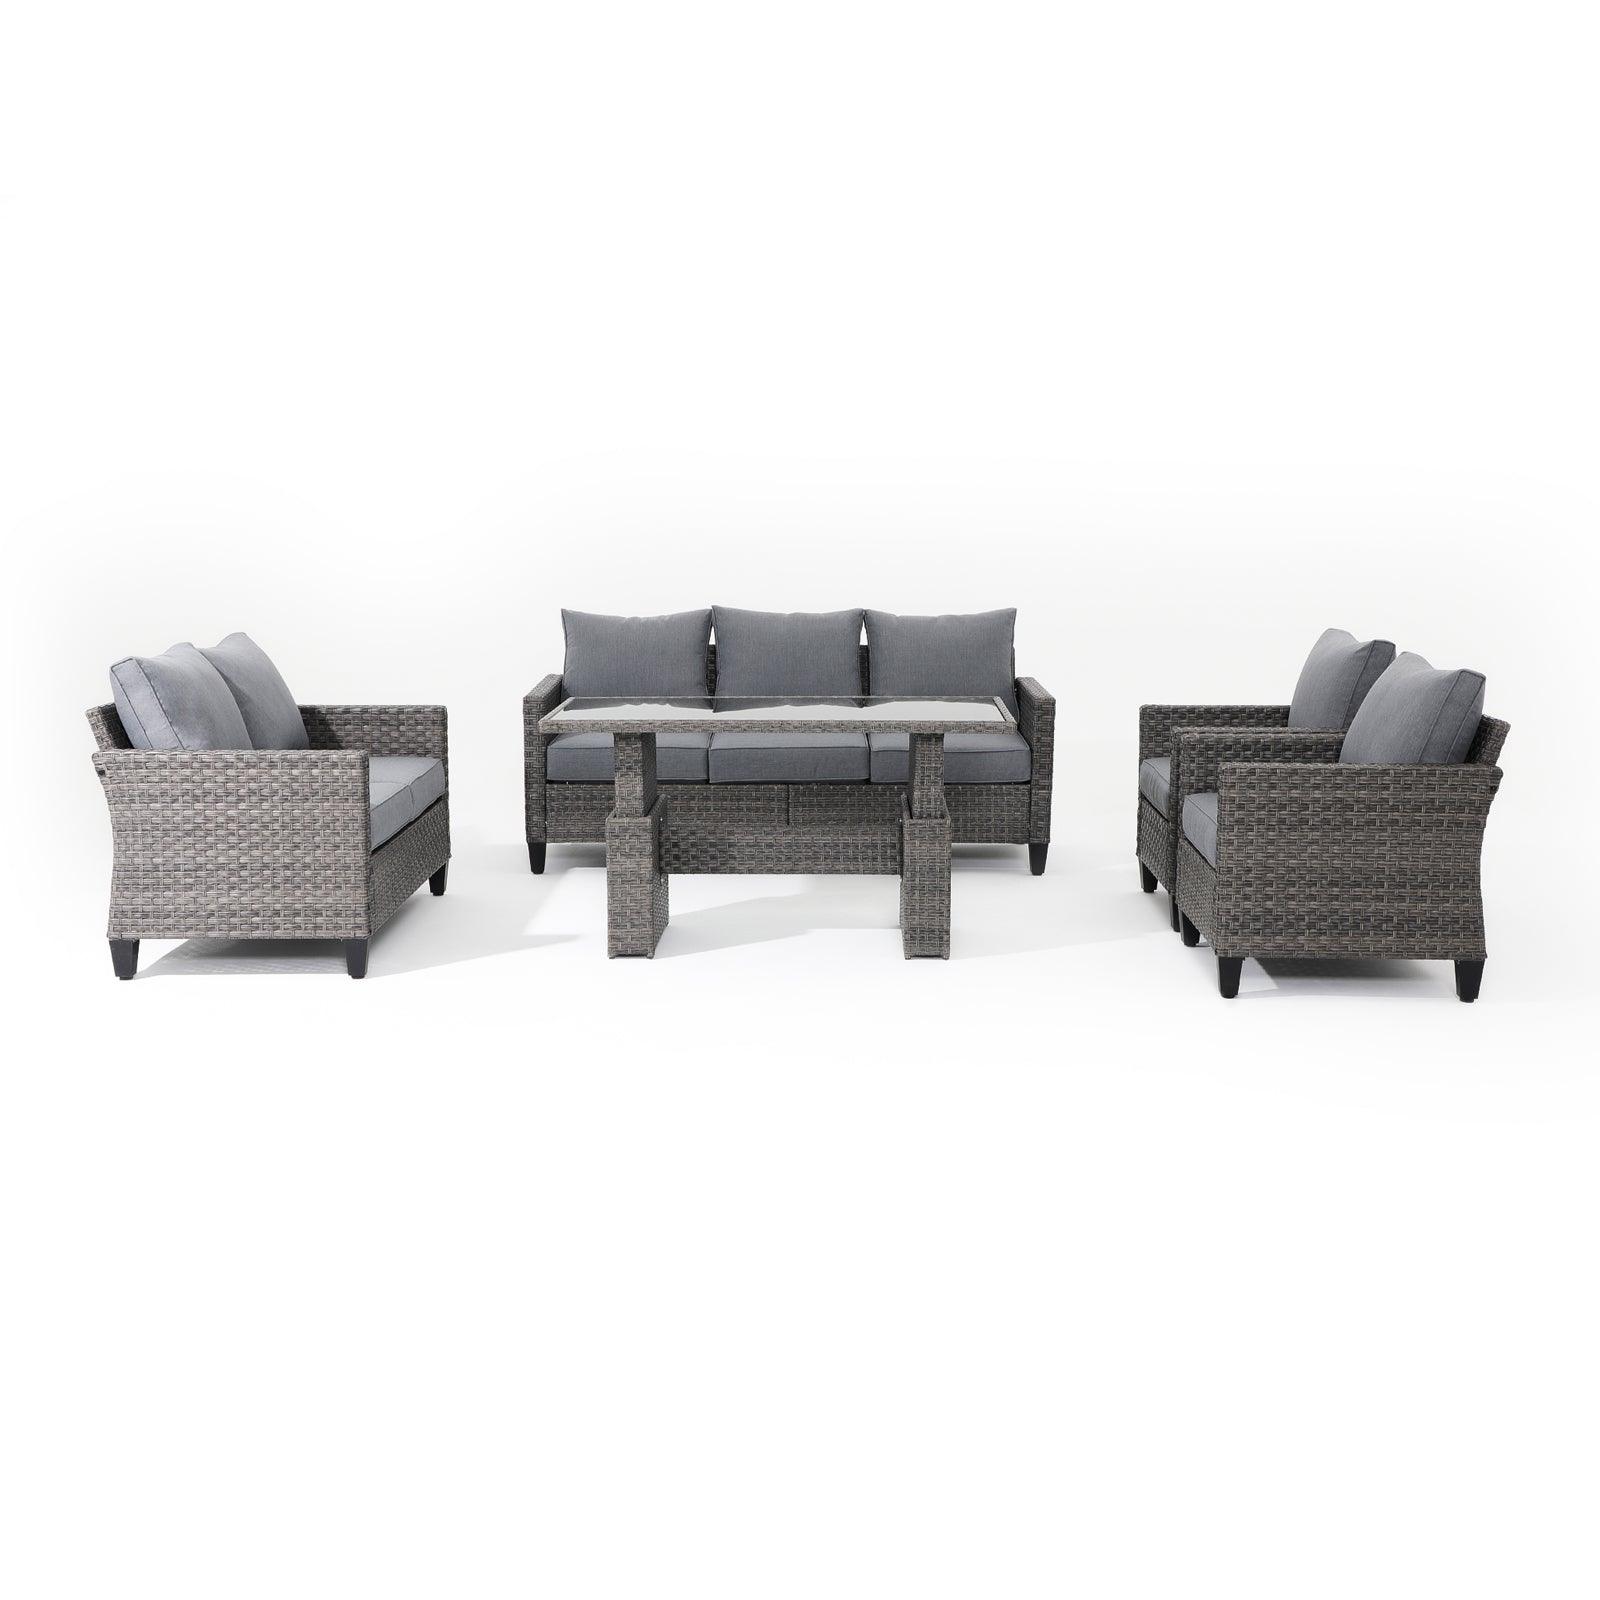 Ayia 5-Piece outdoor Sofa Set with Rattan design, grey cushions, a 3-seater sofa, 2 arm chairs , 1 loveseat, 1 multifunctional lift top dining table, front view - Jardina Furniture #color_Grey#piece_5-pc. with table